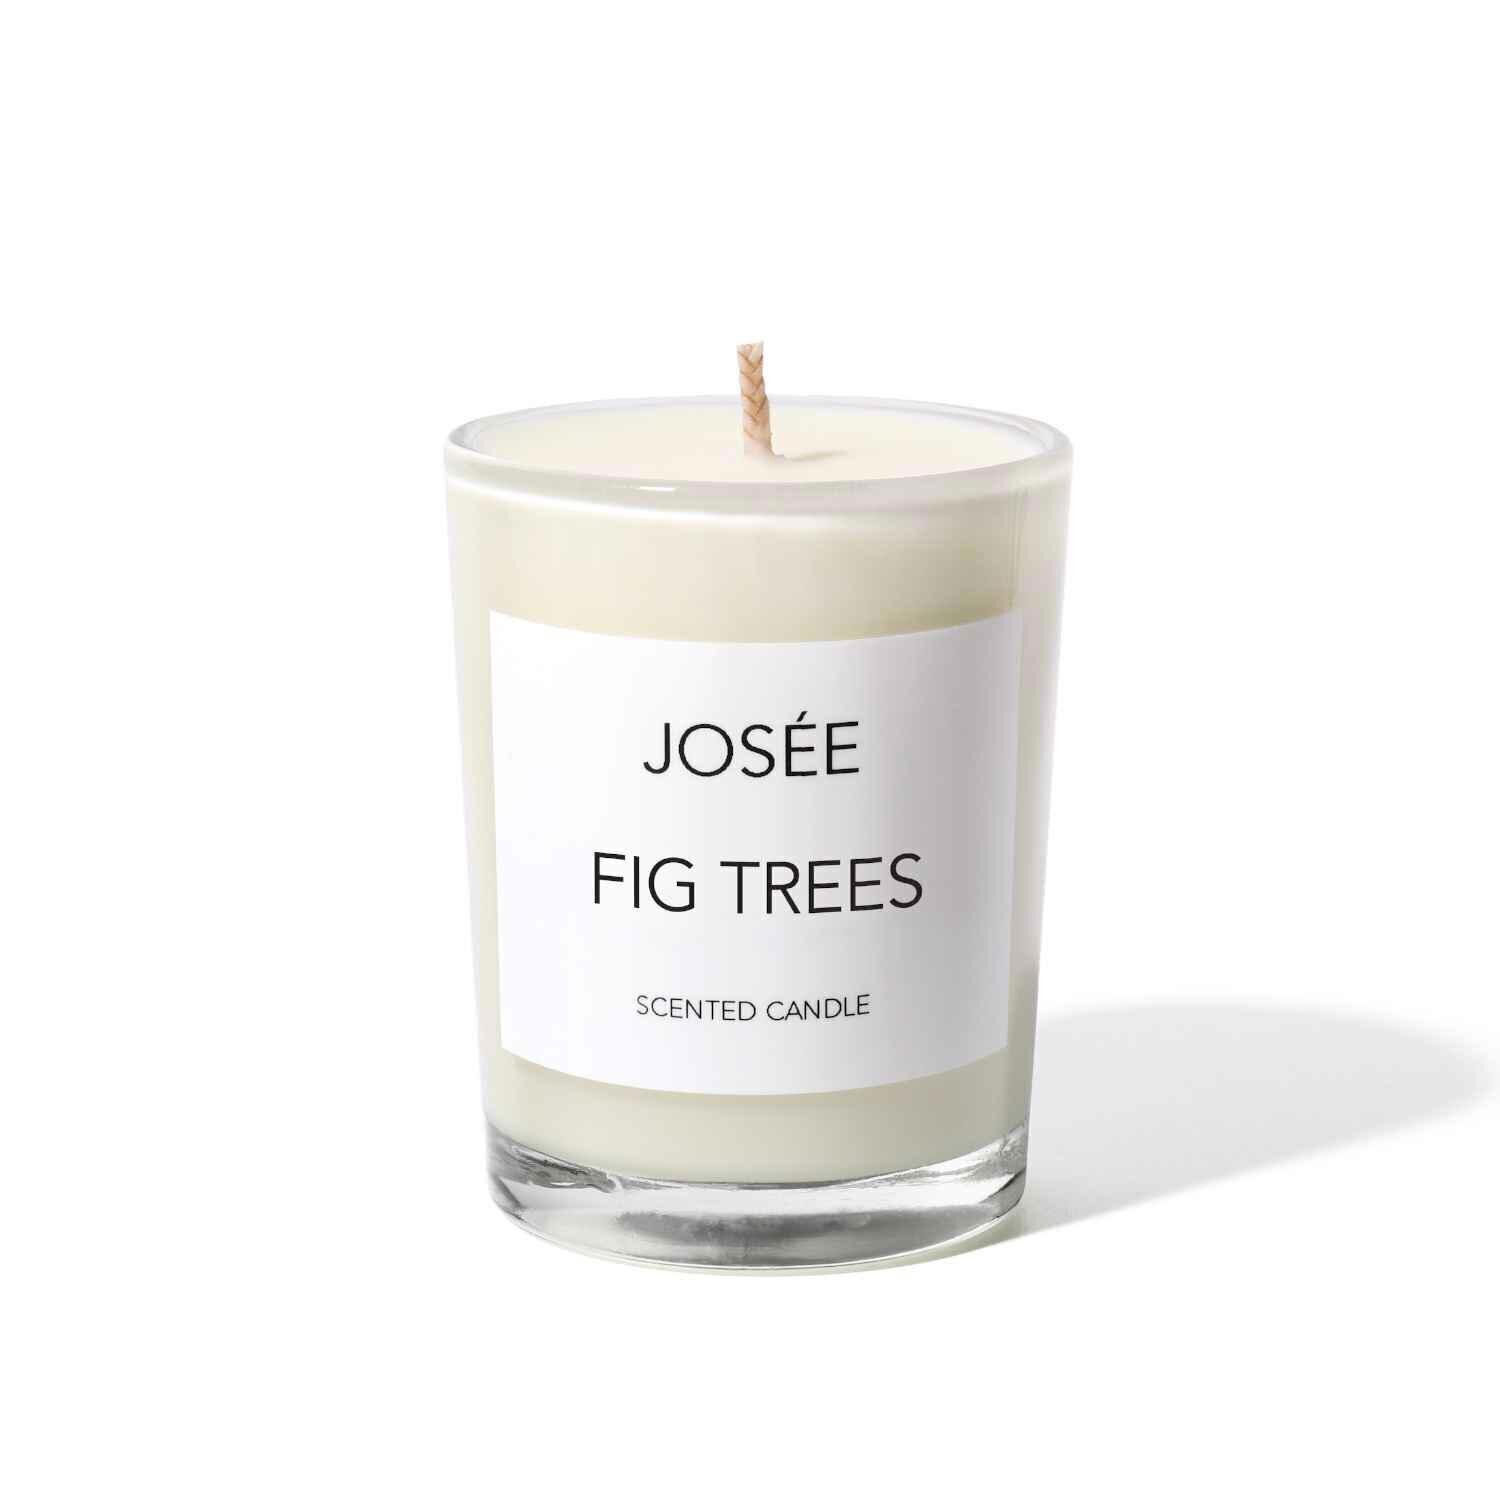 Olive Leaf Aromatic Candle